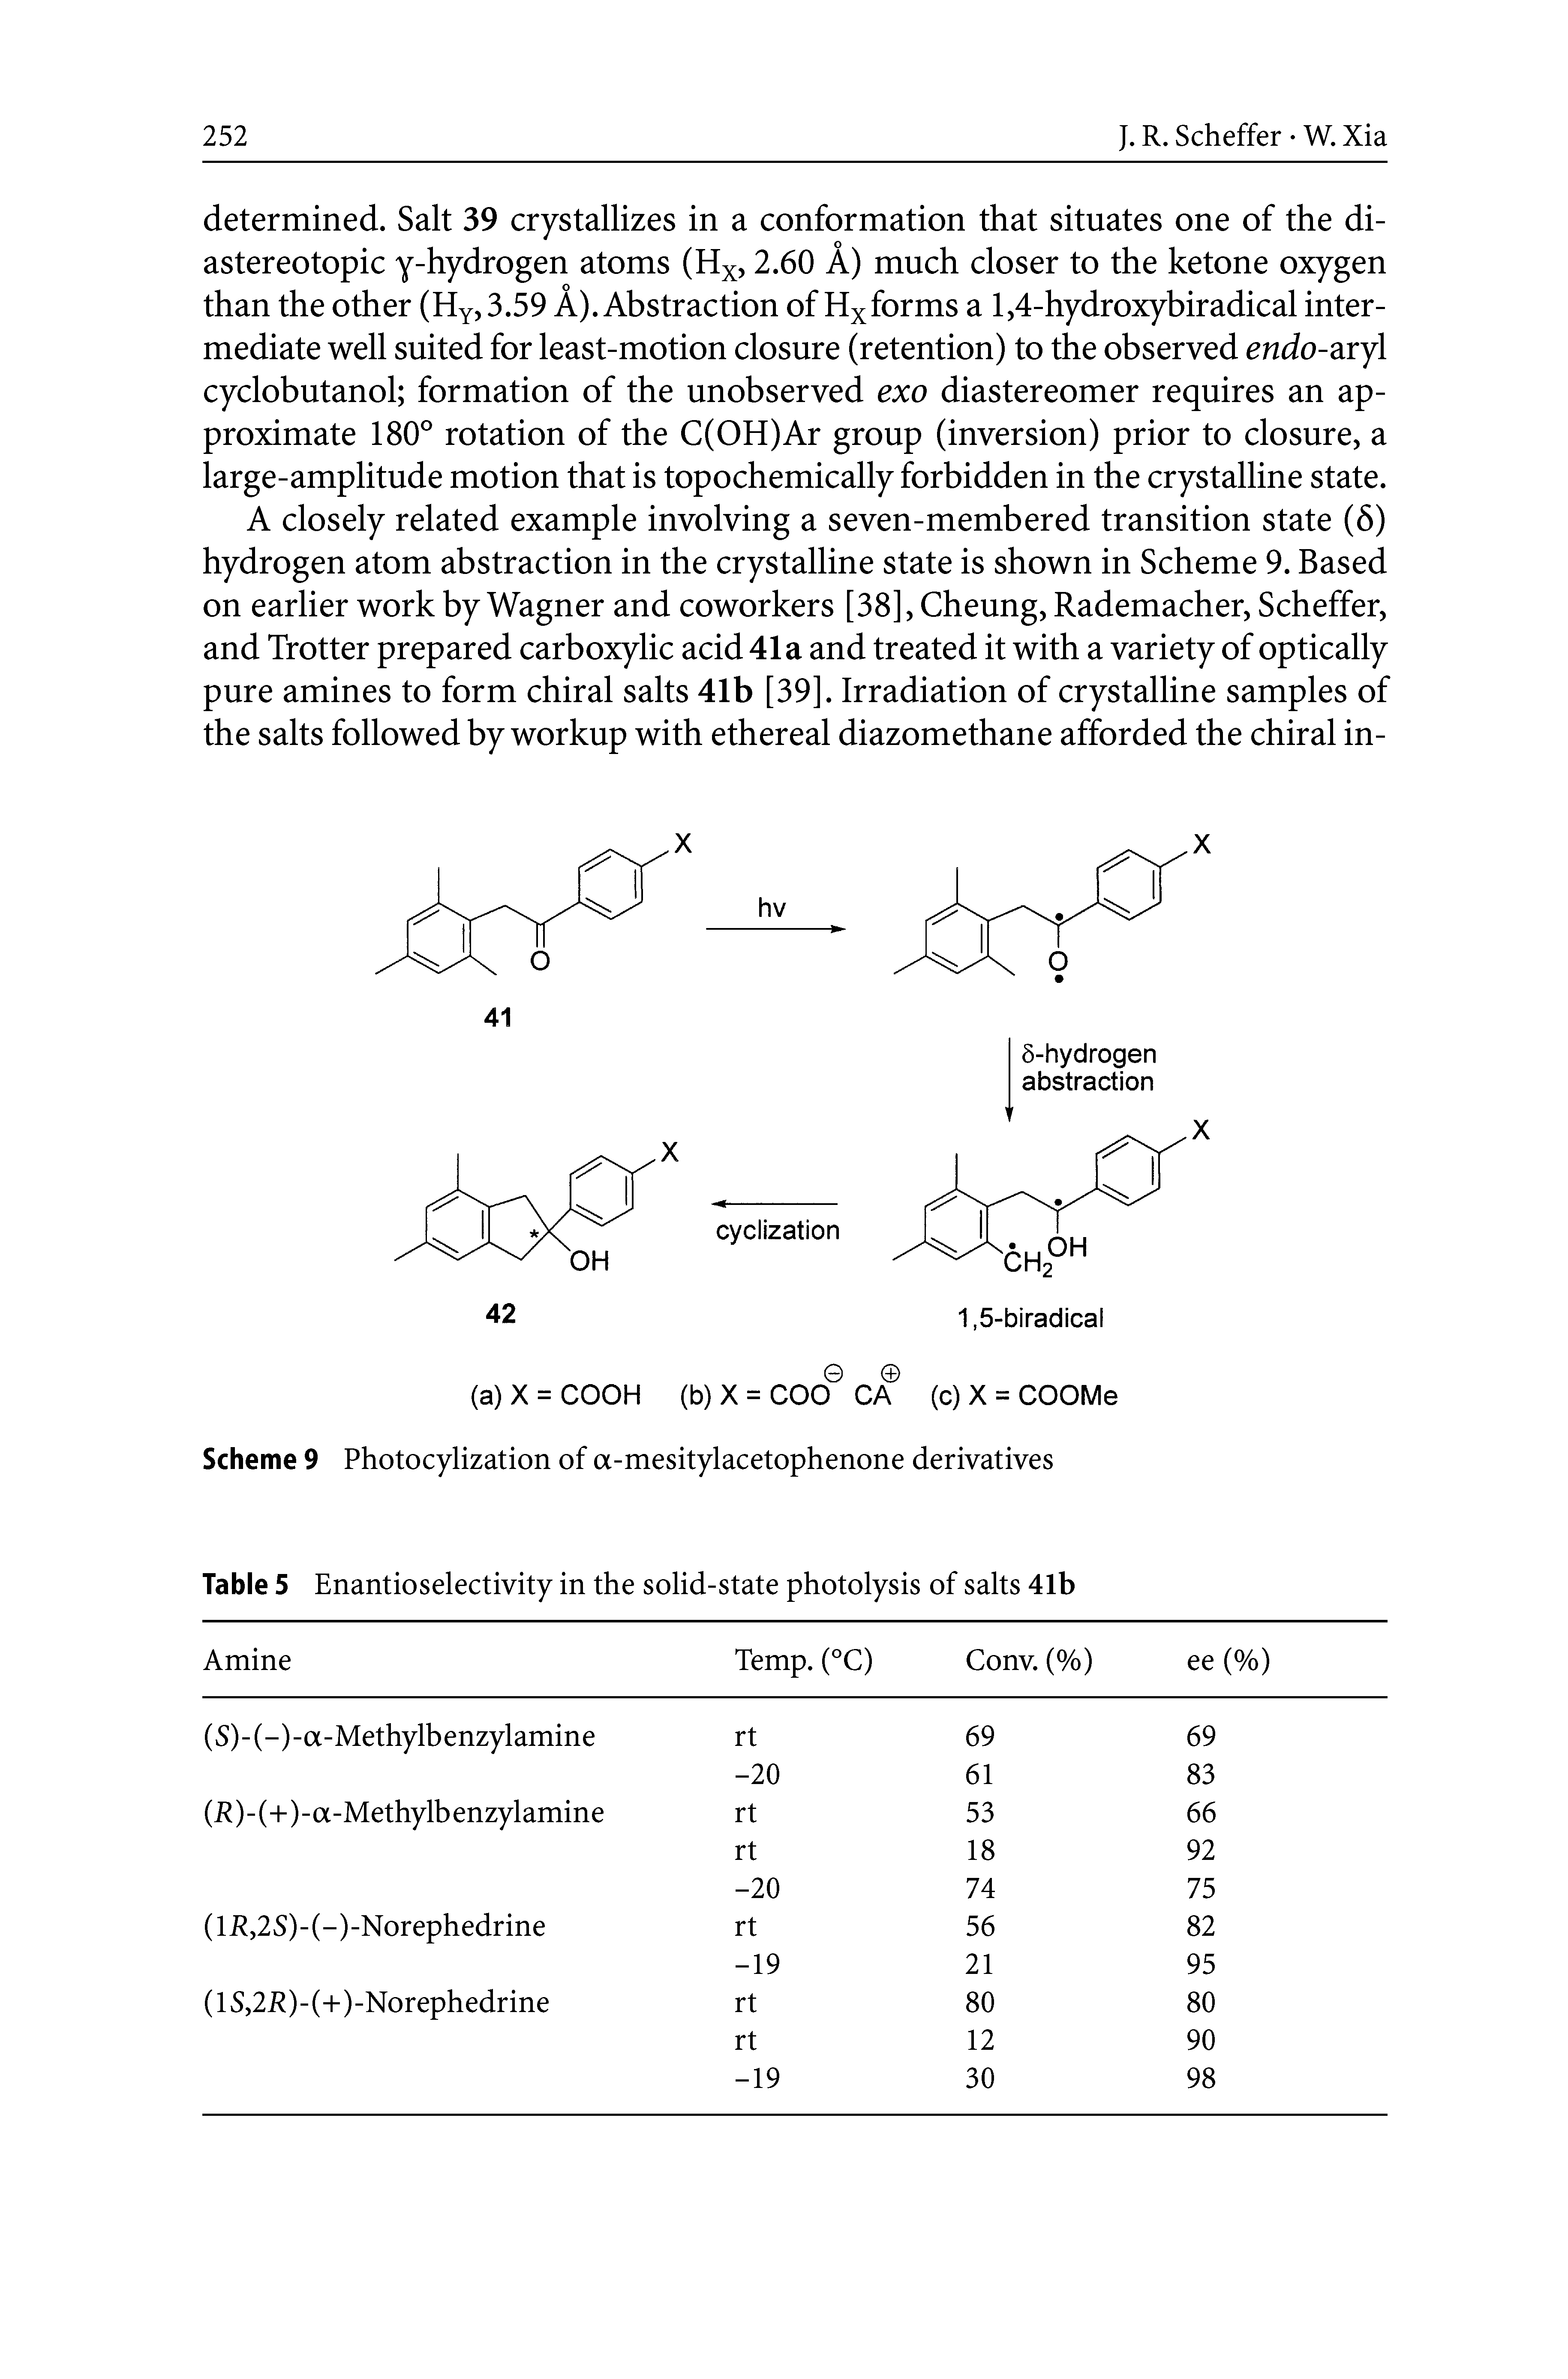 Table 5 Enantioselectivity in the solid-state photolysis of salts 41b ...